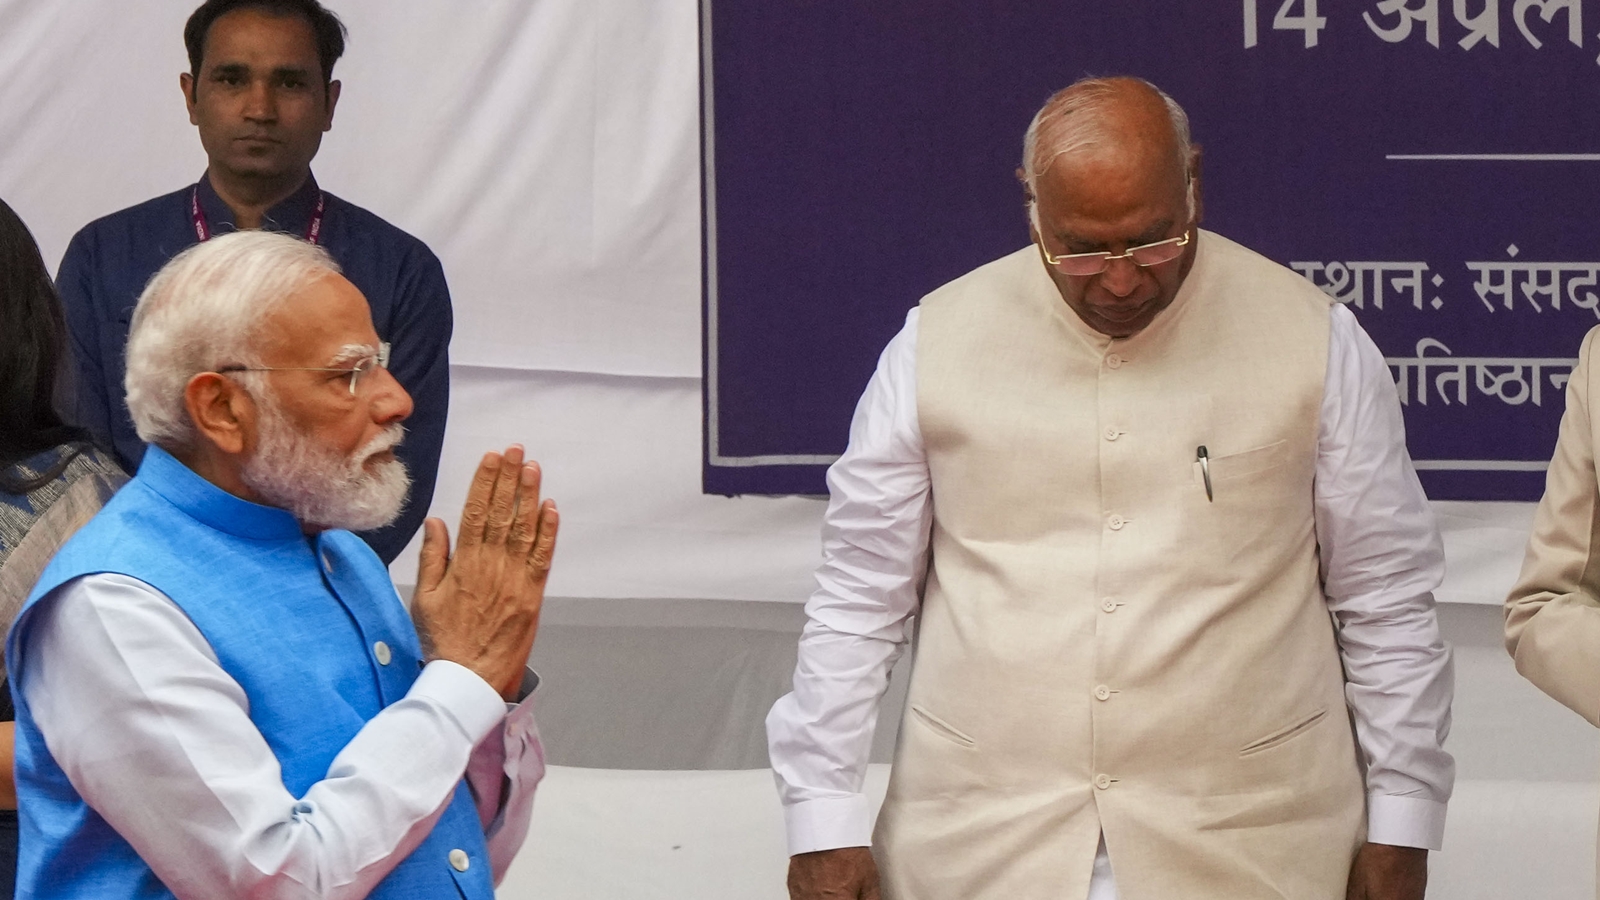 android, day after modi’s remarks, mallikarjun kharge seeks appointment with pm to discuss congress manifesto